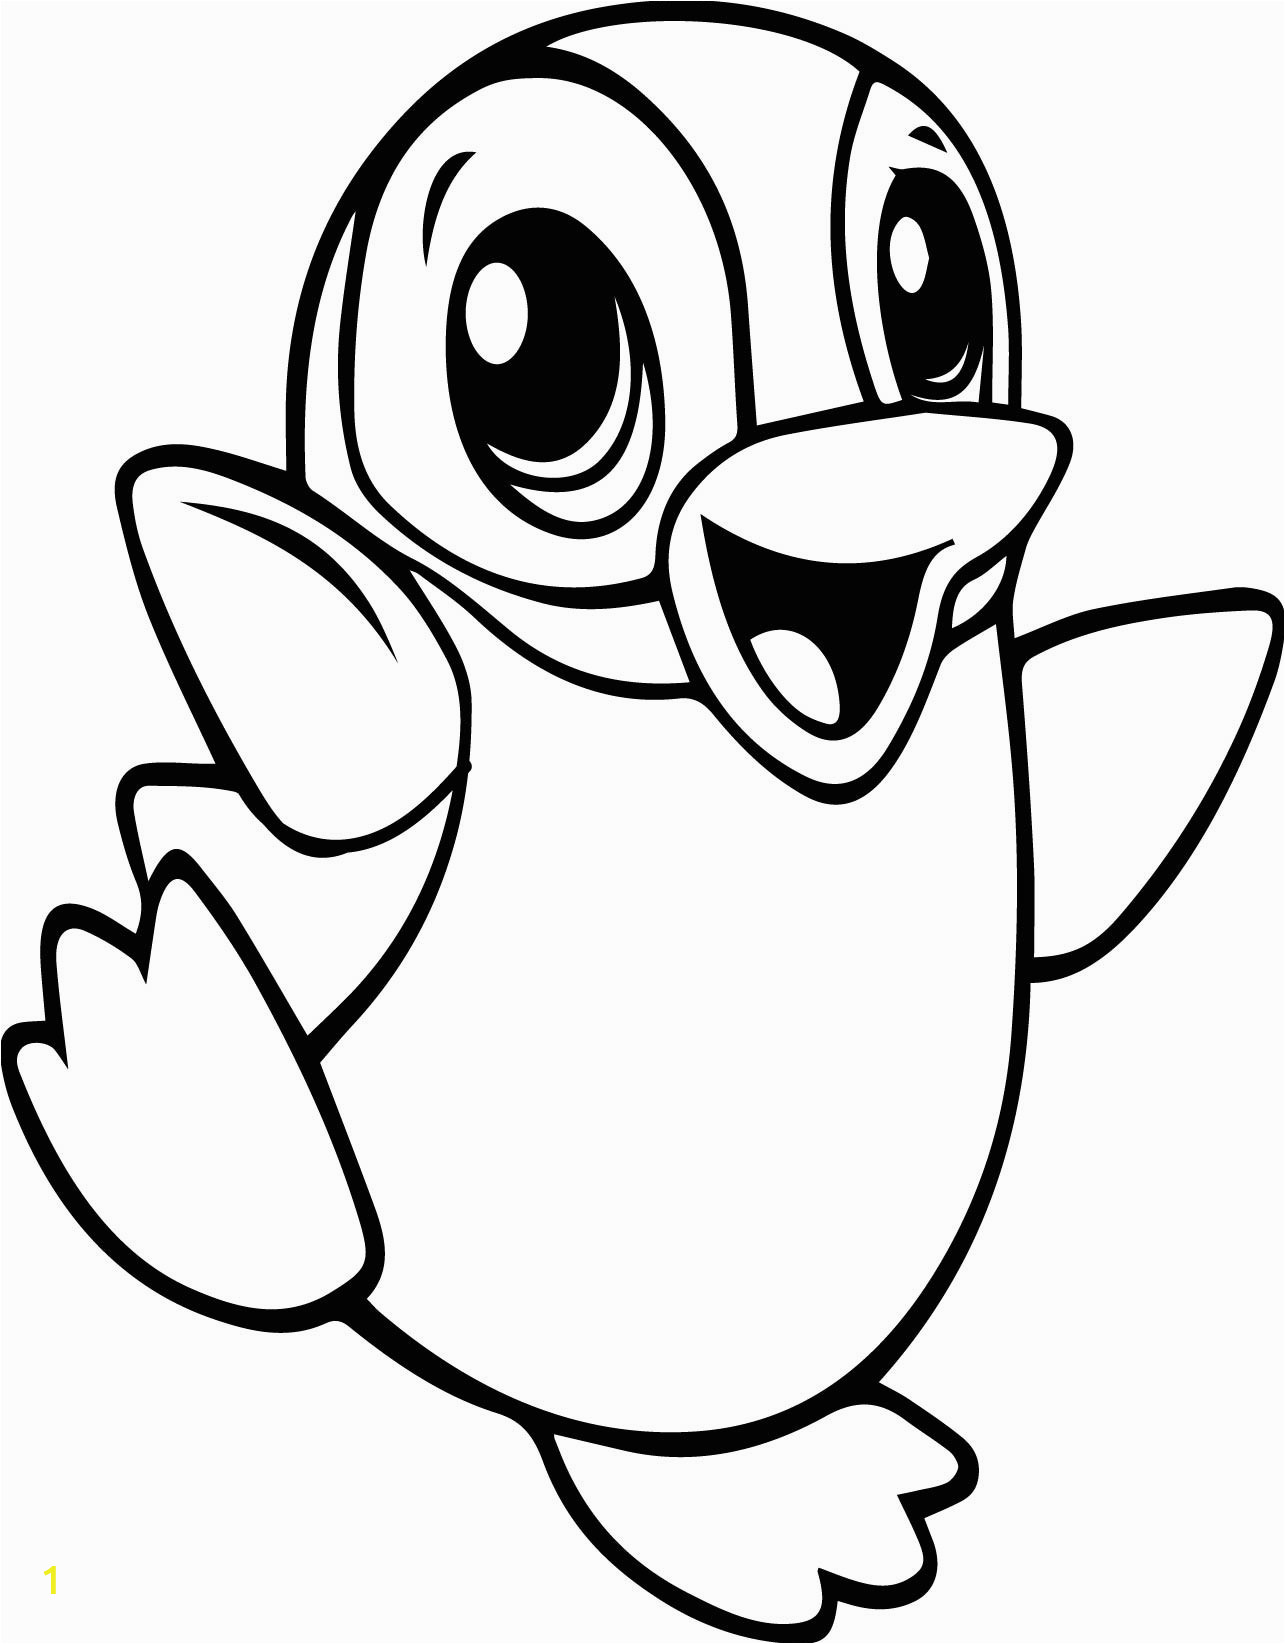 Baby Animal Coloring Pages for Kids Cute Animal Coloring Pages Best Coloring Pages for Kids